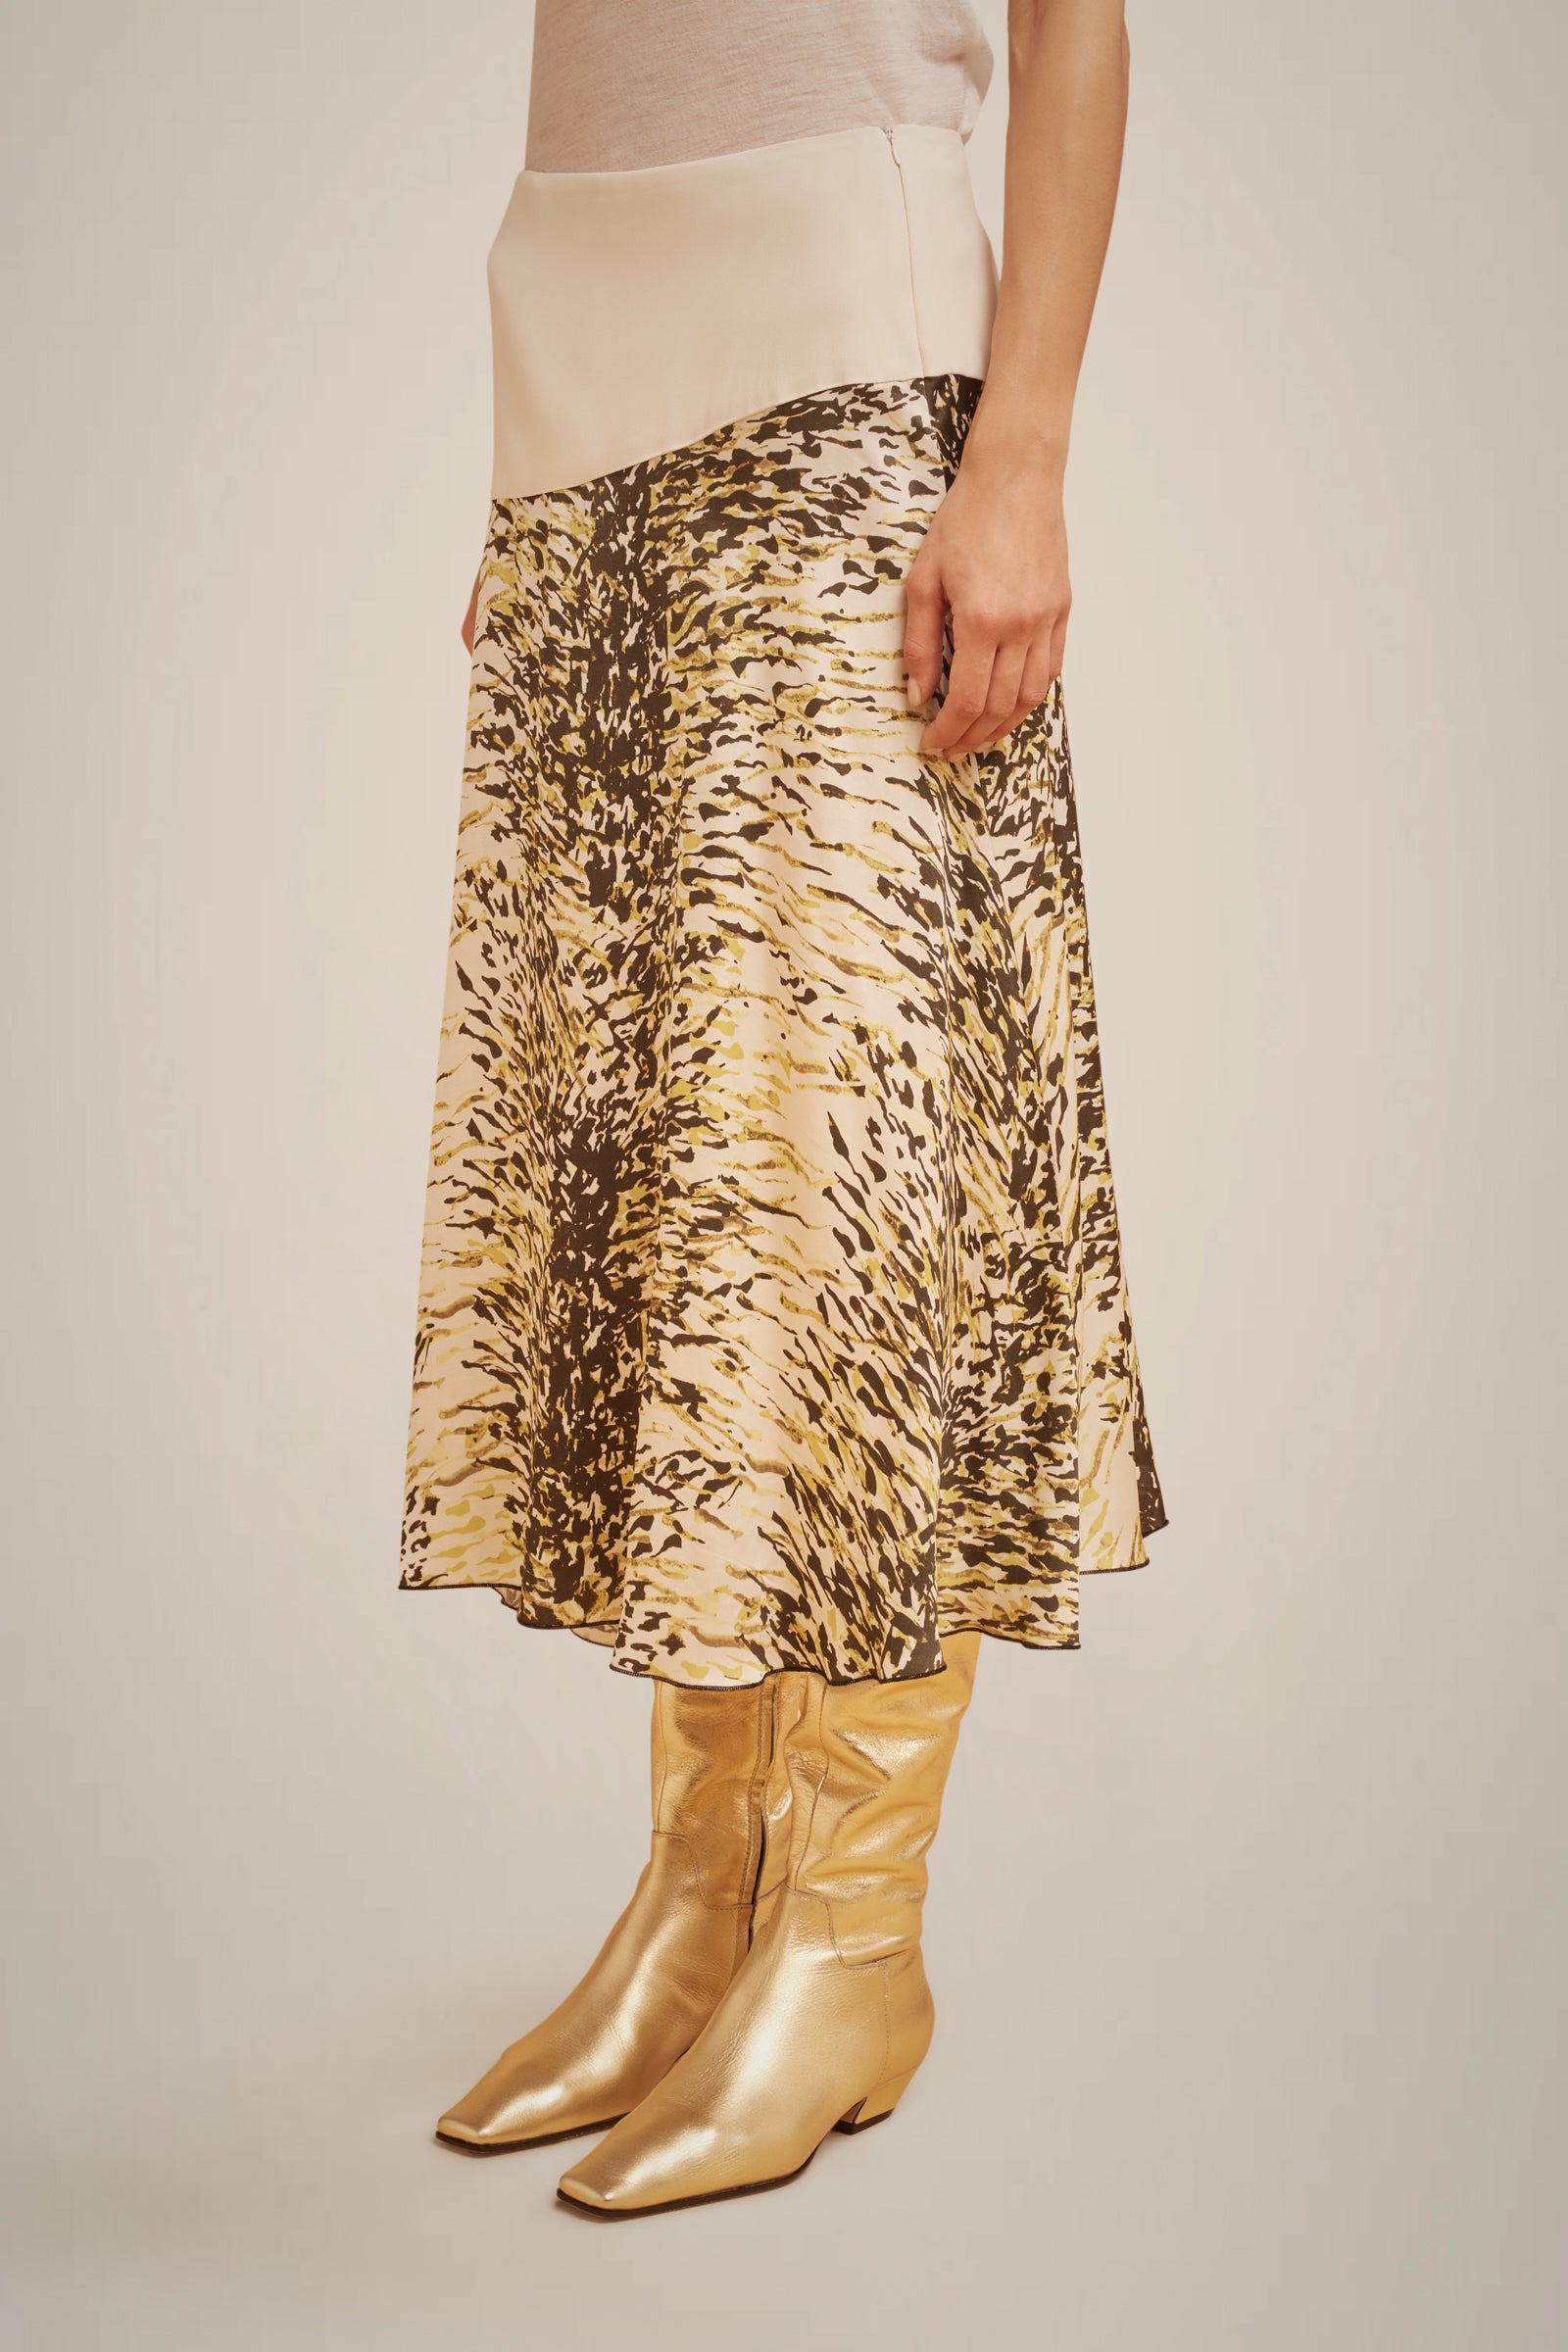 PRINTED SKIRT WITH BASQUE